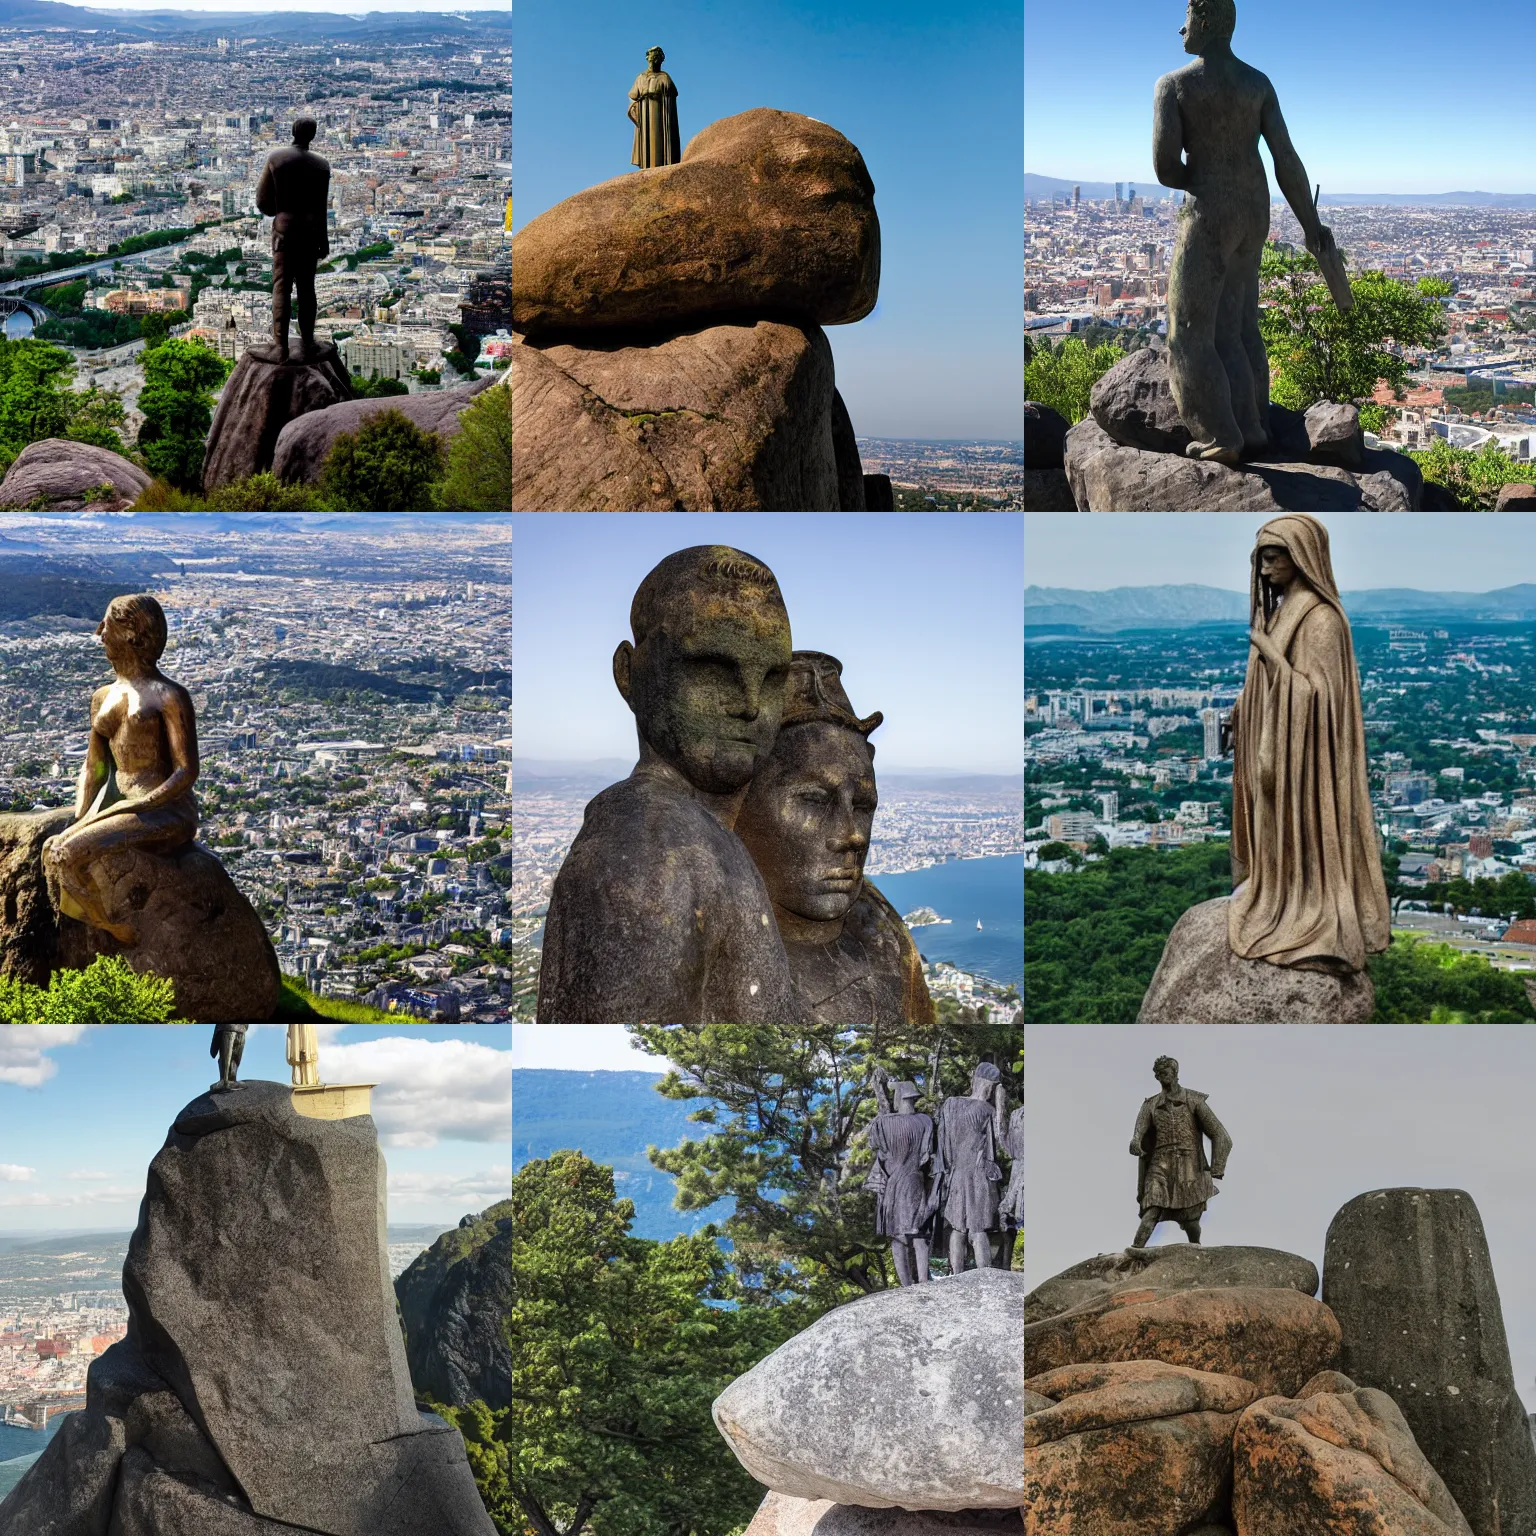 Prompt: the statue stands atop a large rock with a city below